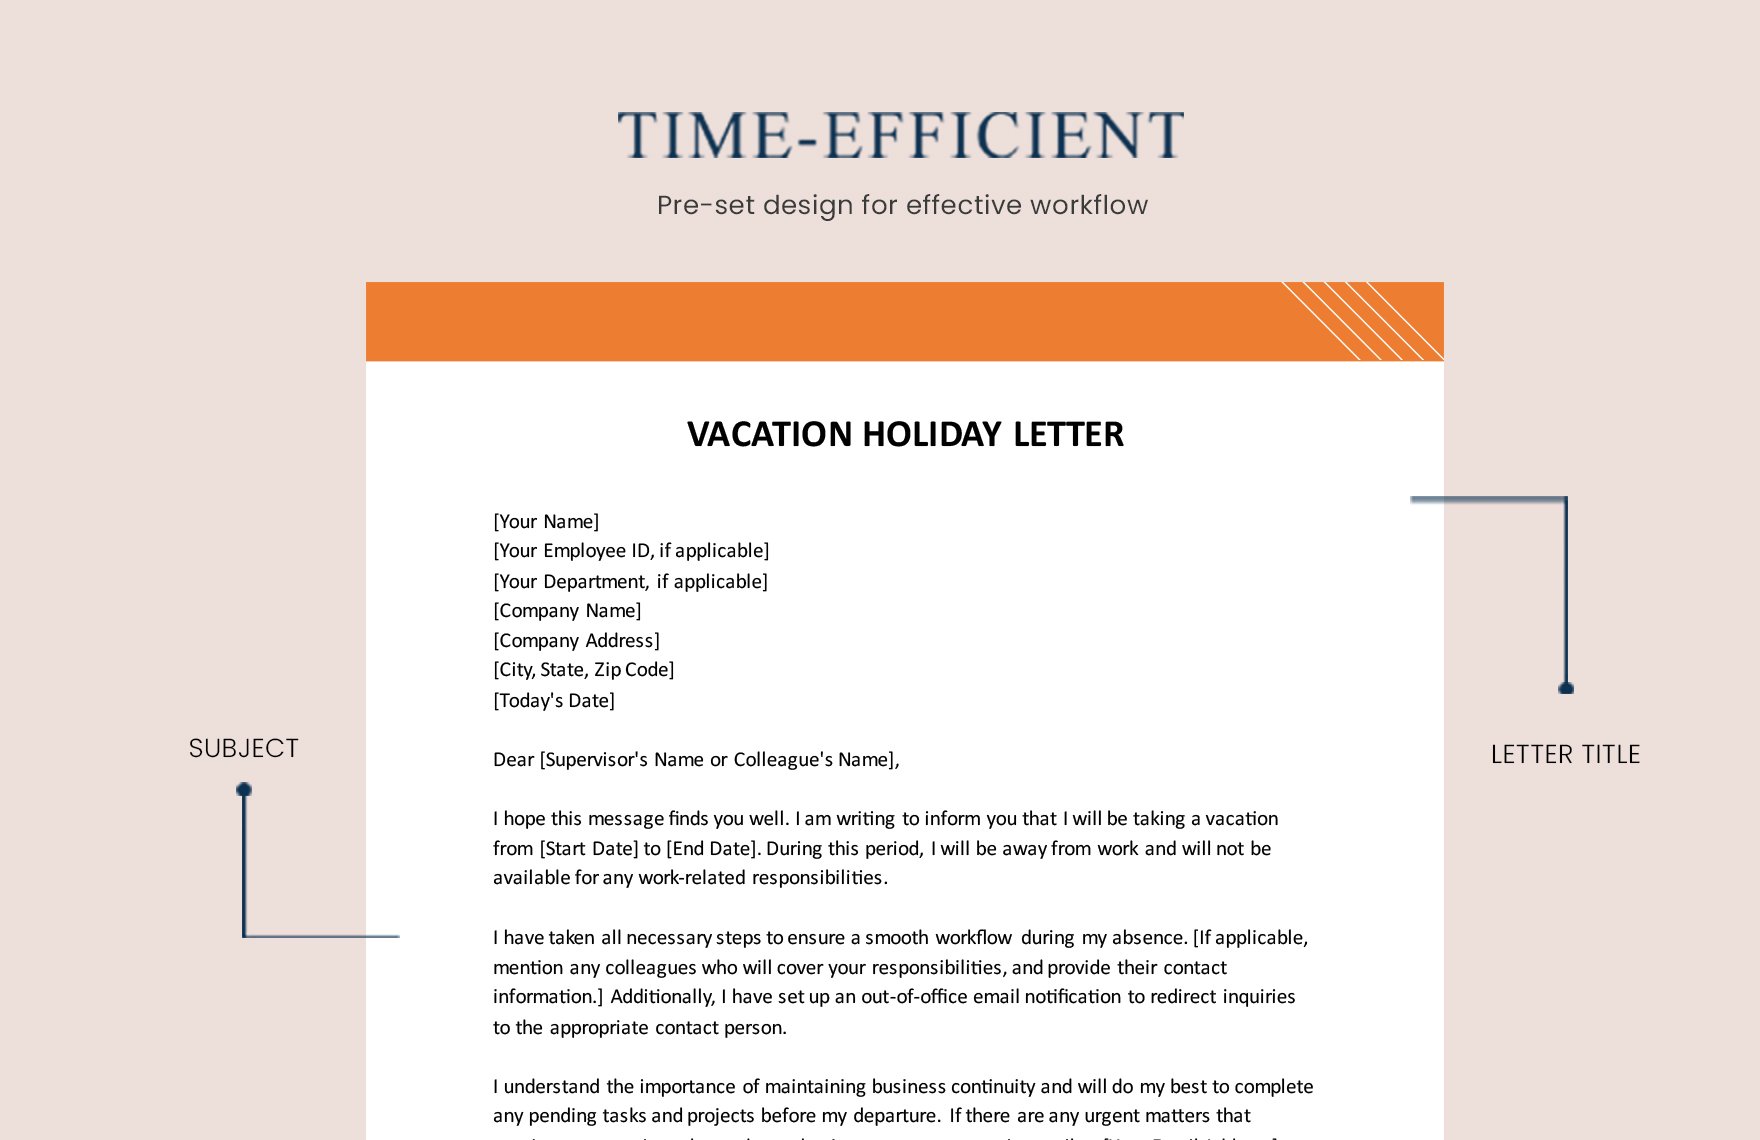 Vacation Holiday Letter